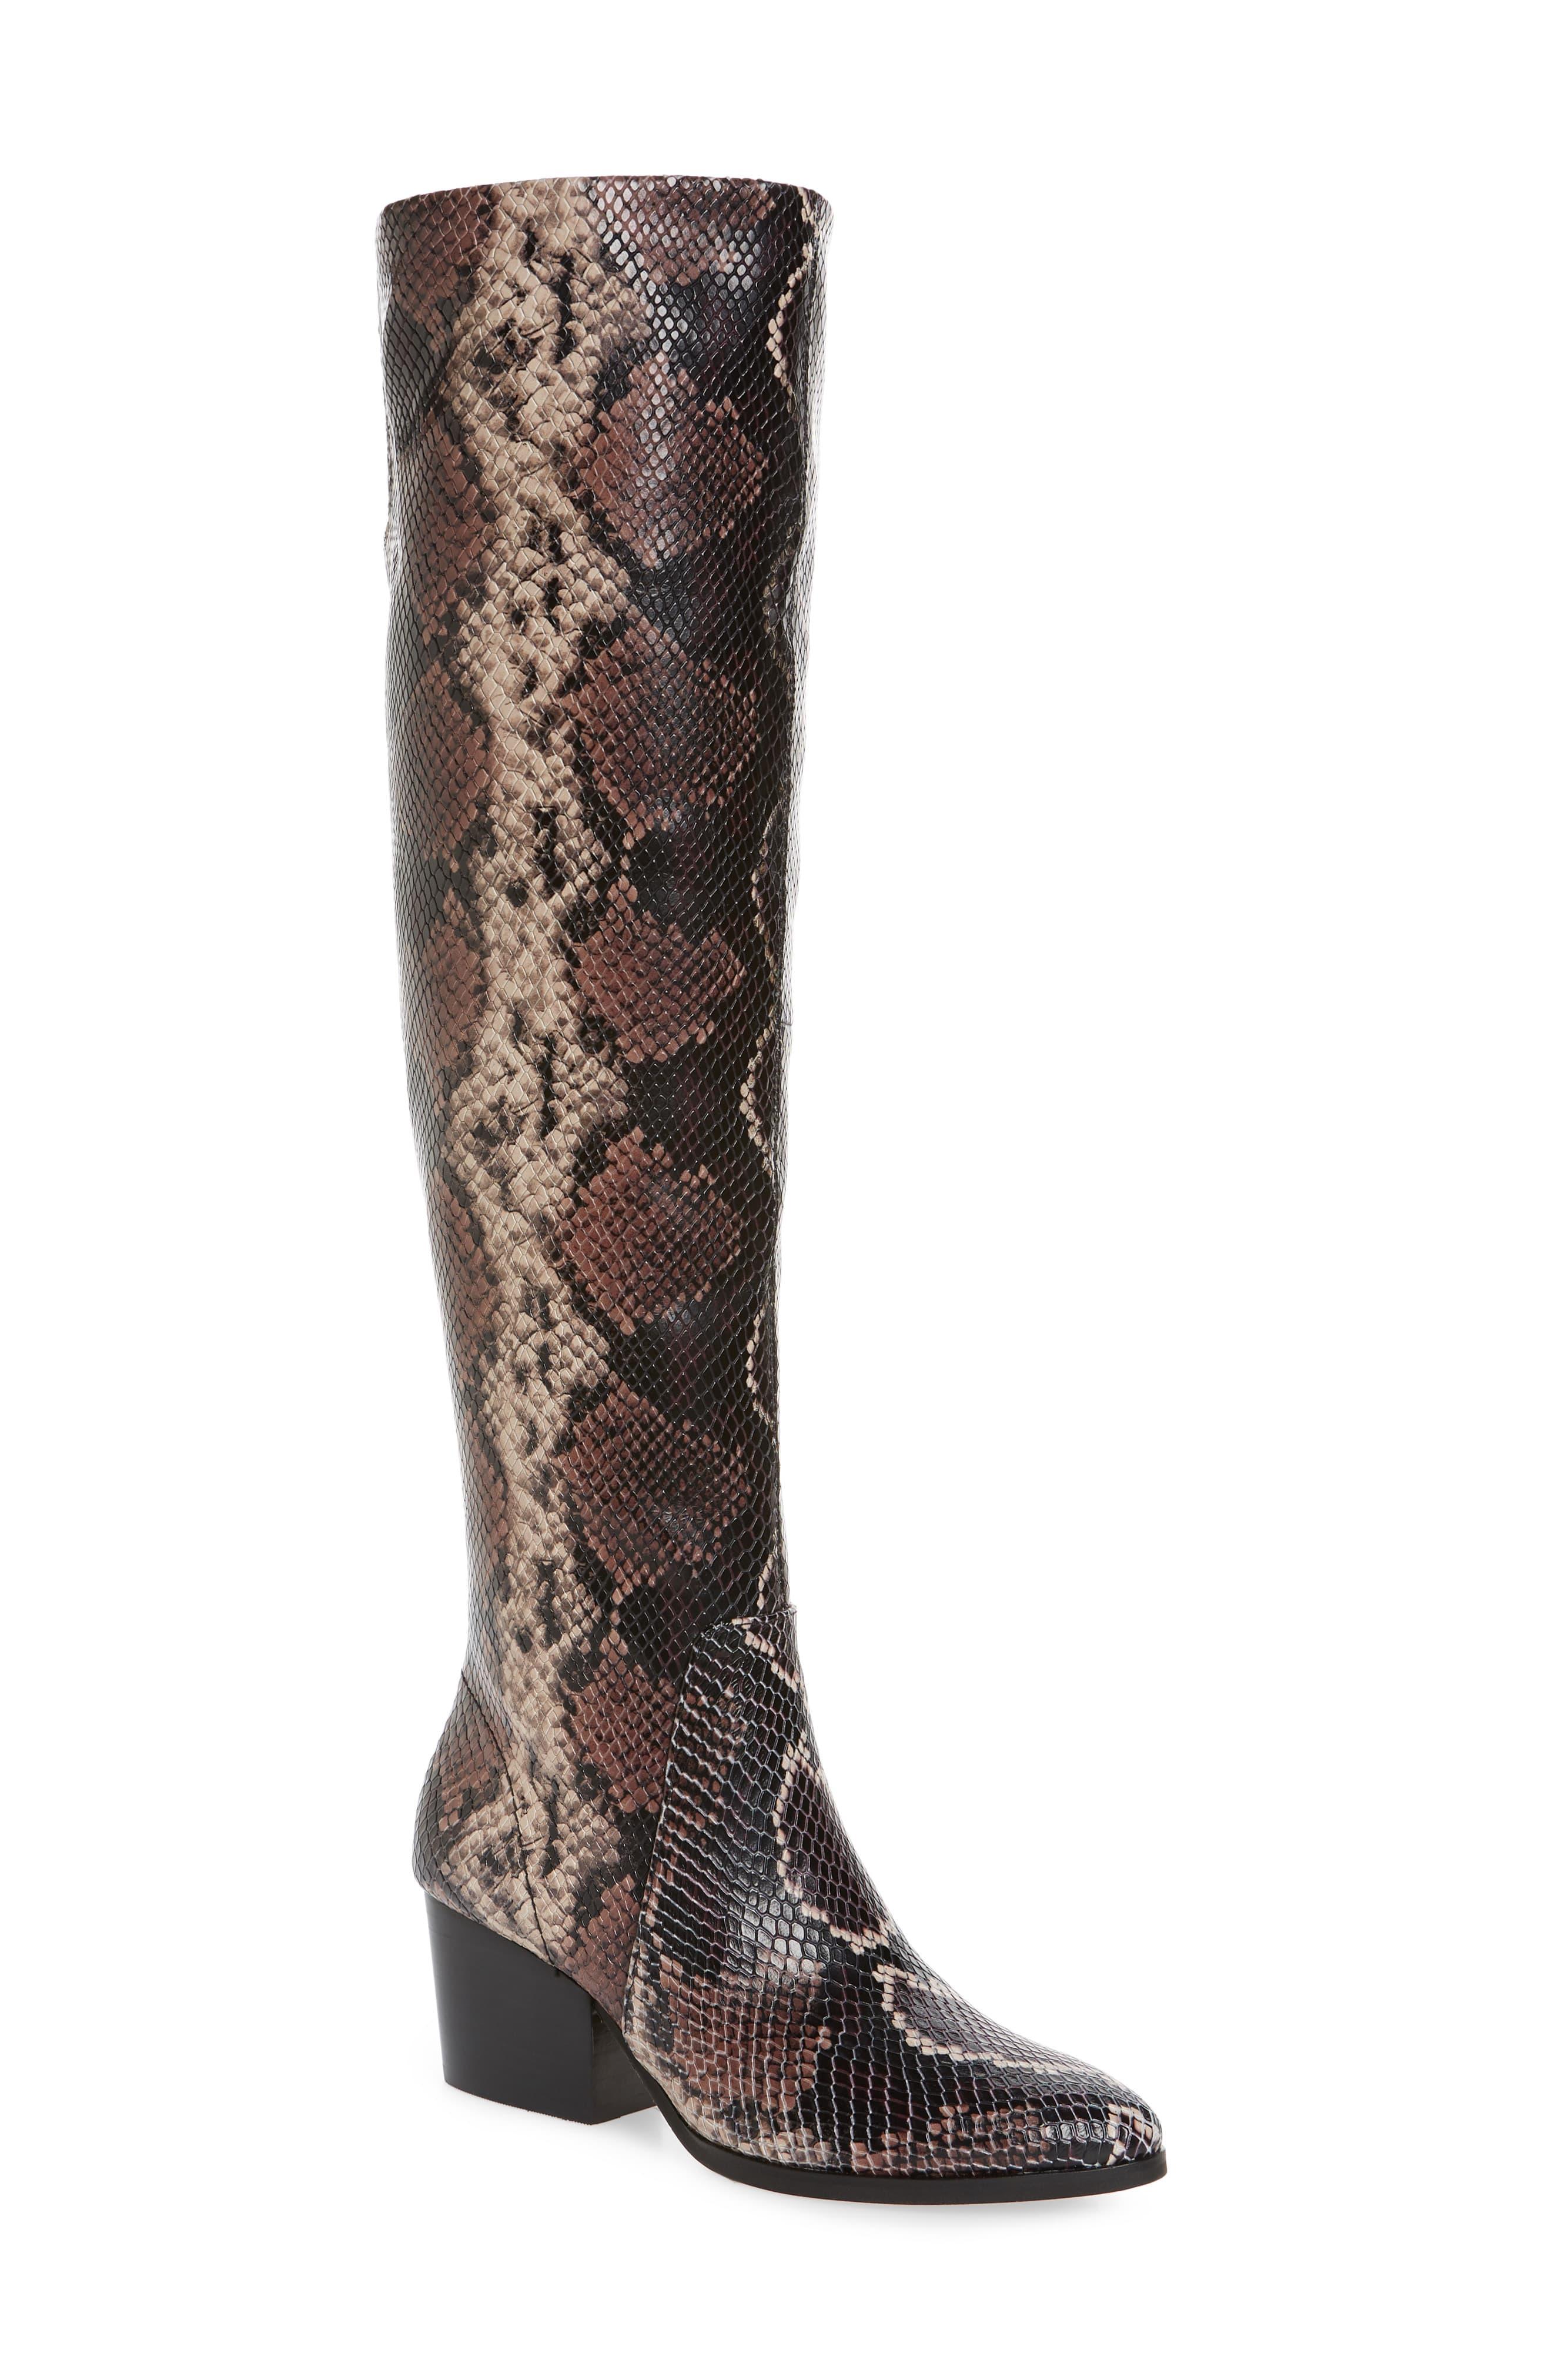 Vince Camuto Nestel Knee High Boot - Lyst